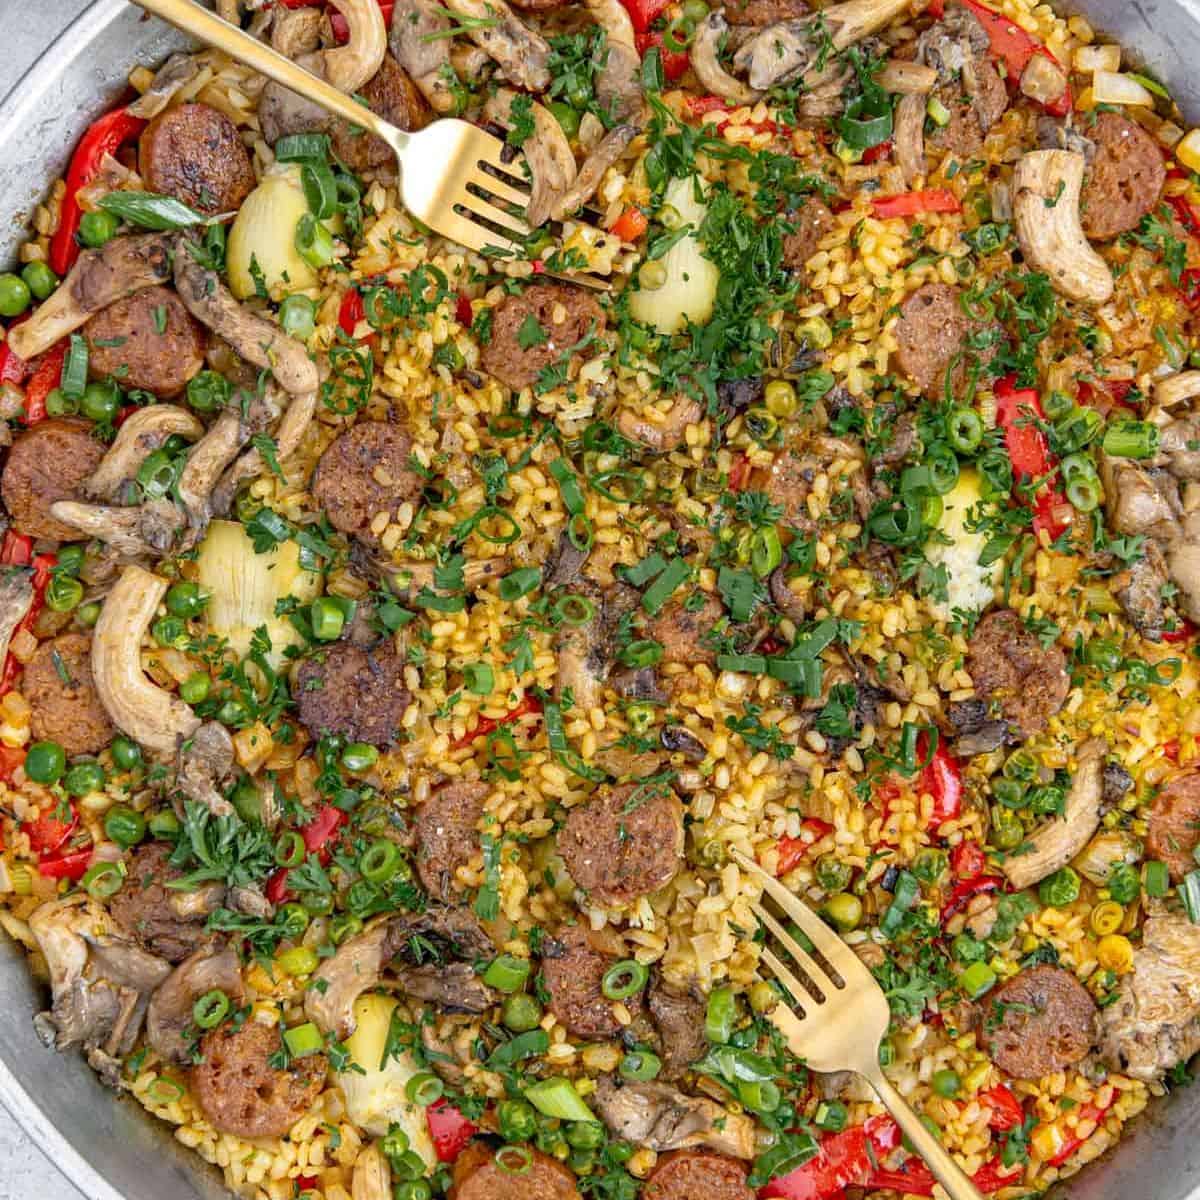 Paella with sausage and vegetables in a pan.